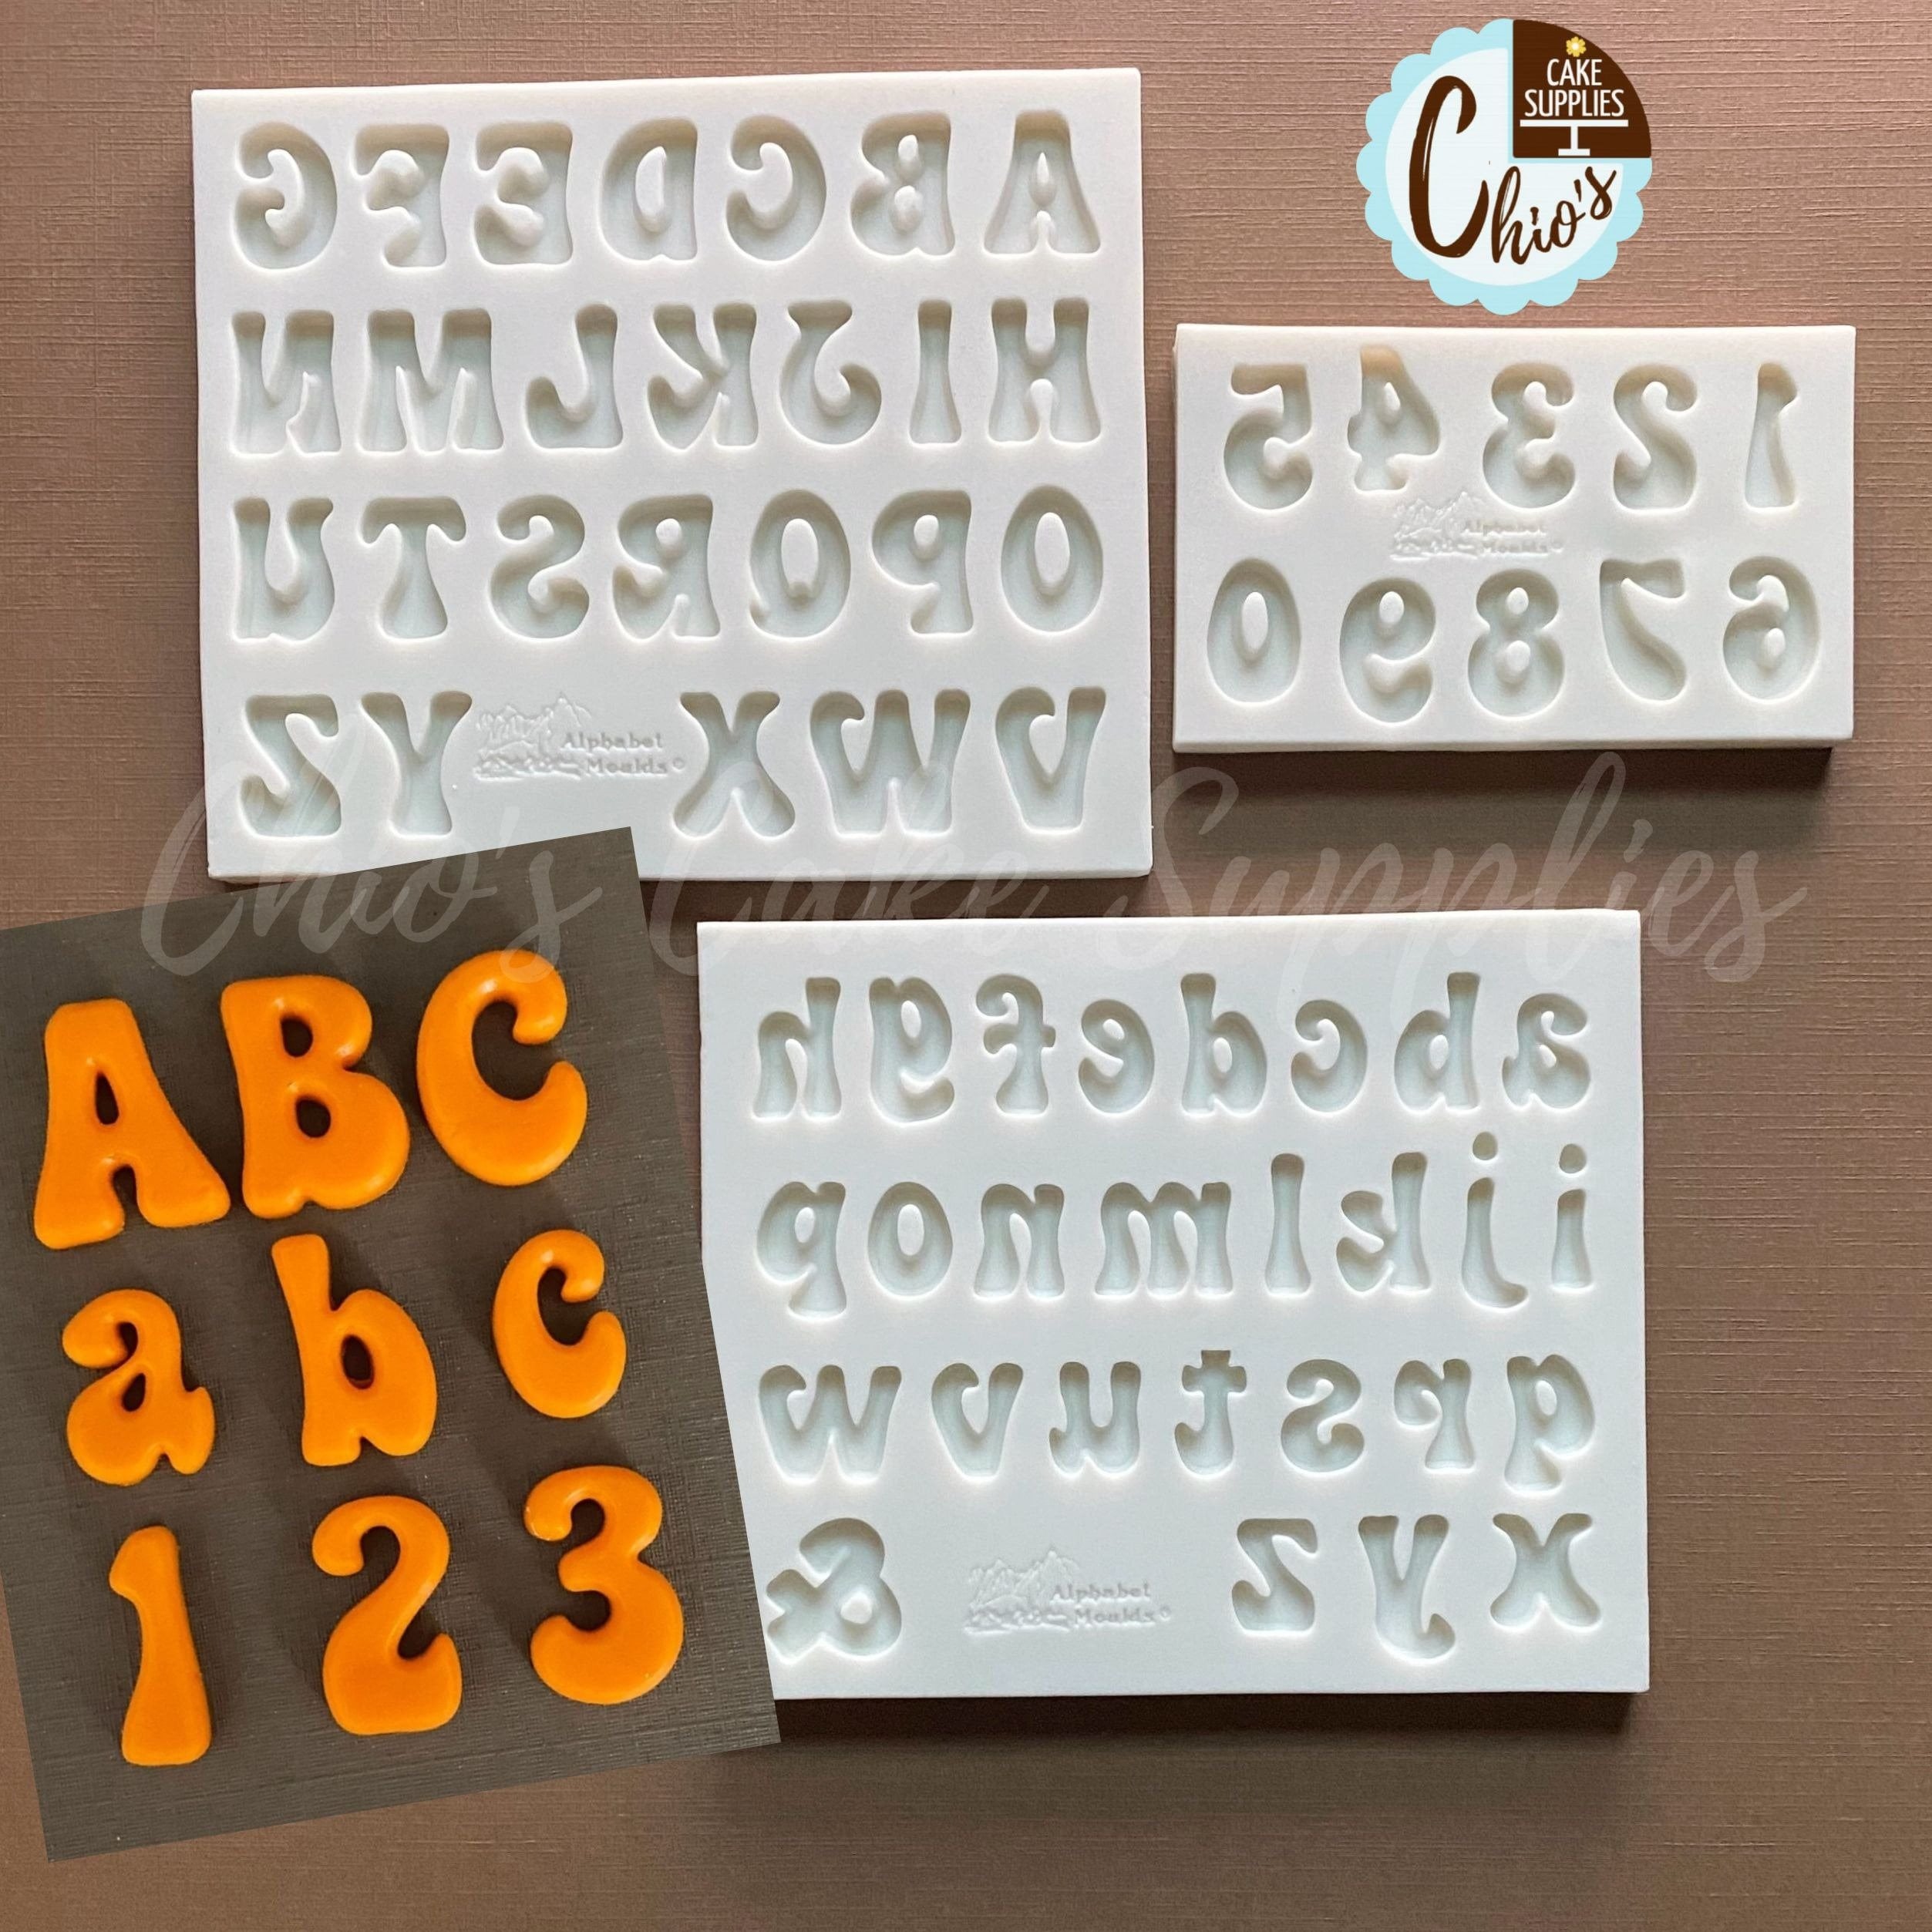 AM10-12 Mold SET / Height 0.7-1 cm Thickness 2 mm / UV Resin Mold / Alphabet  Mold / Silicone Mold - Punfun Studio Silicone Mold Stamper Resin Supply  Craft Accessories